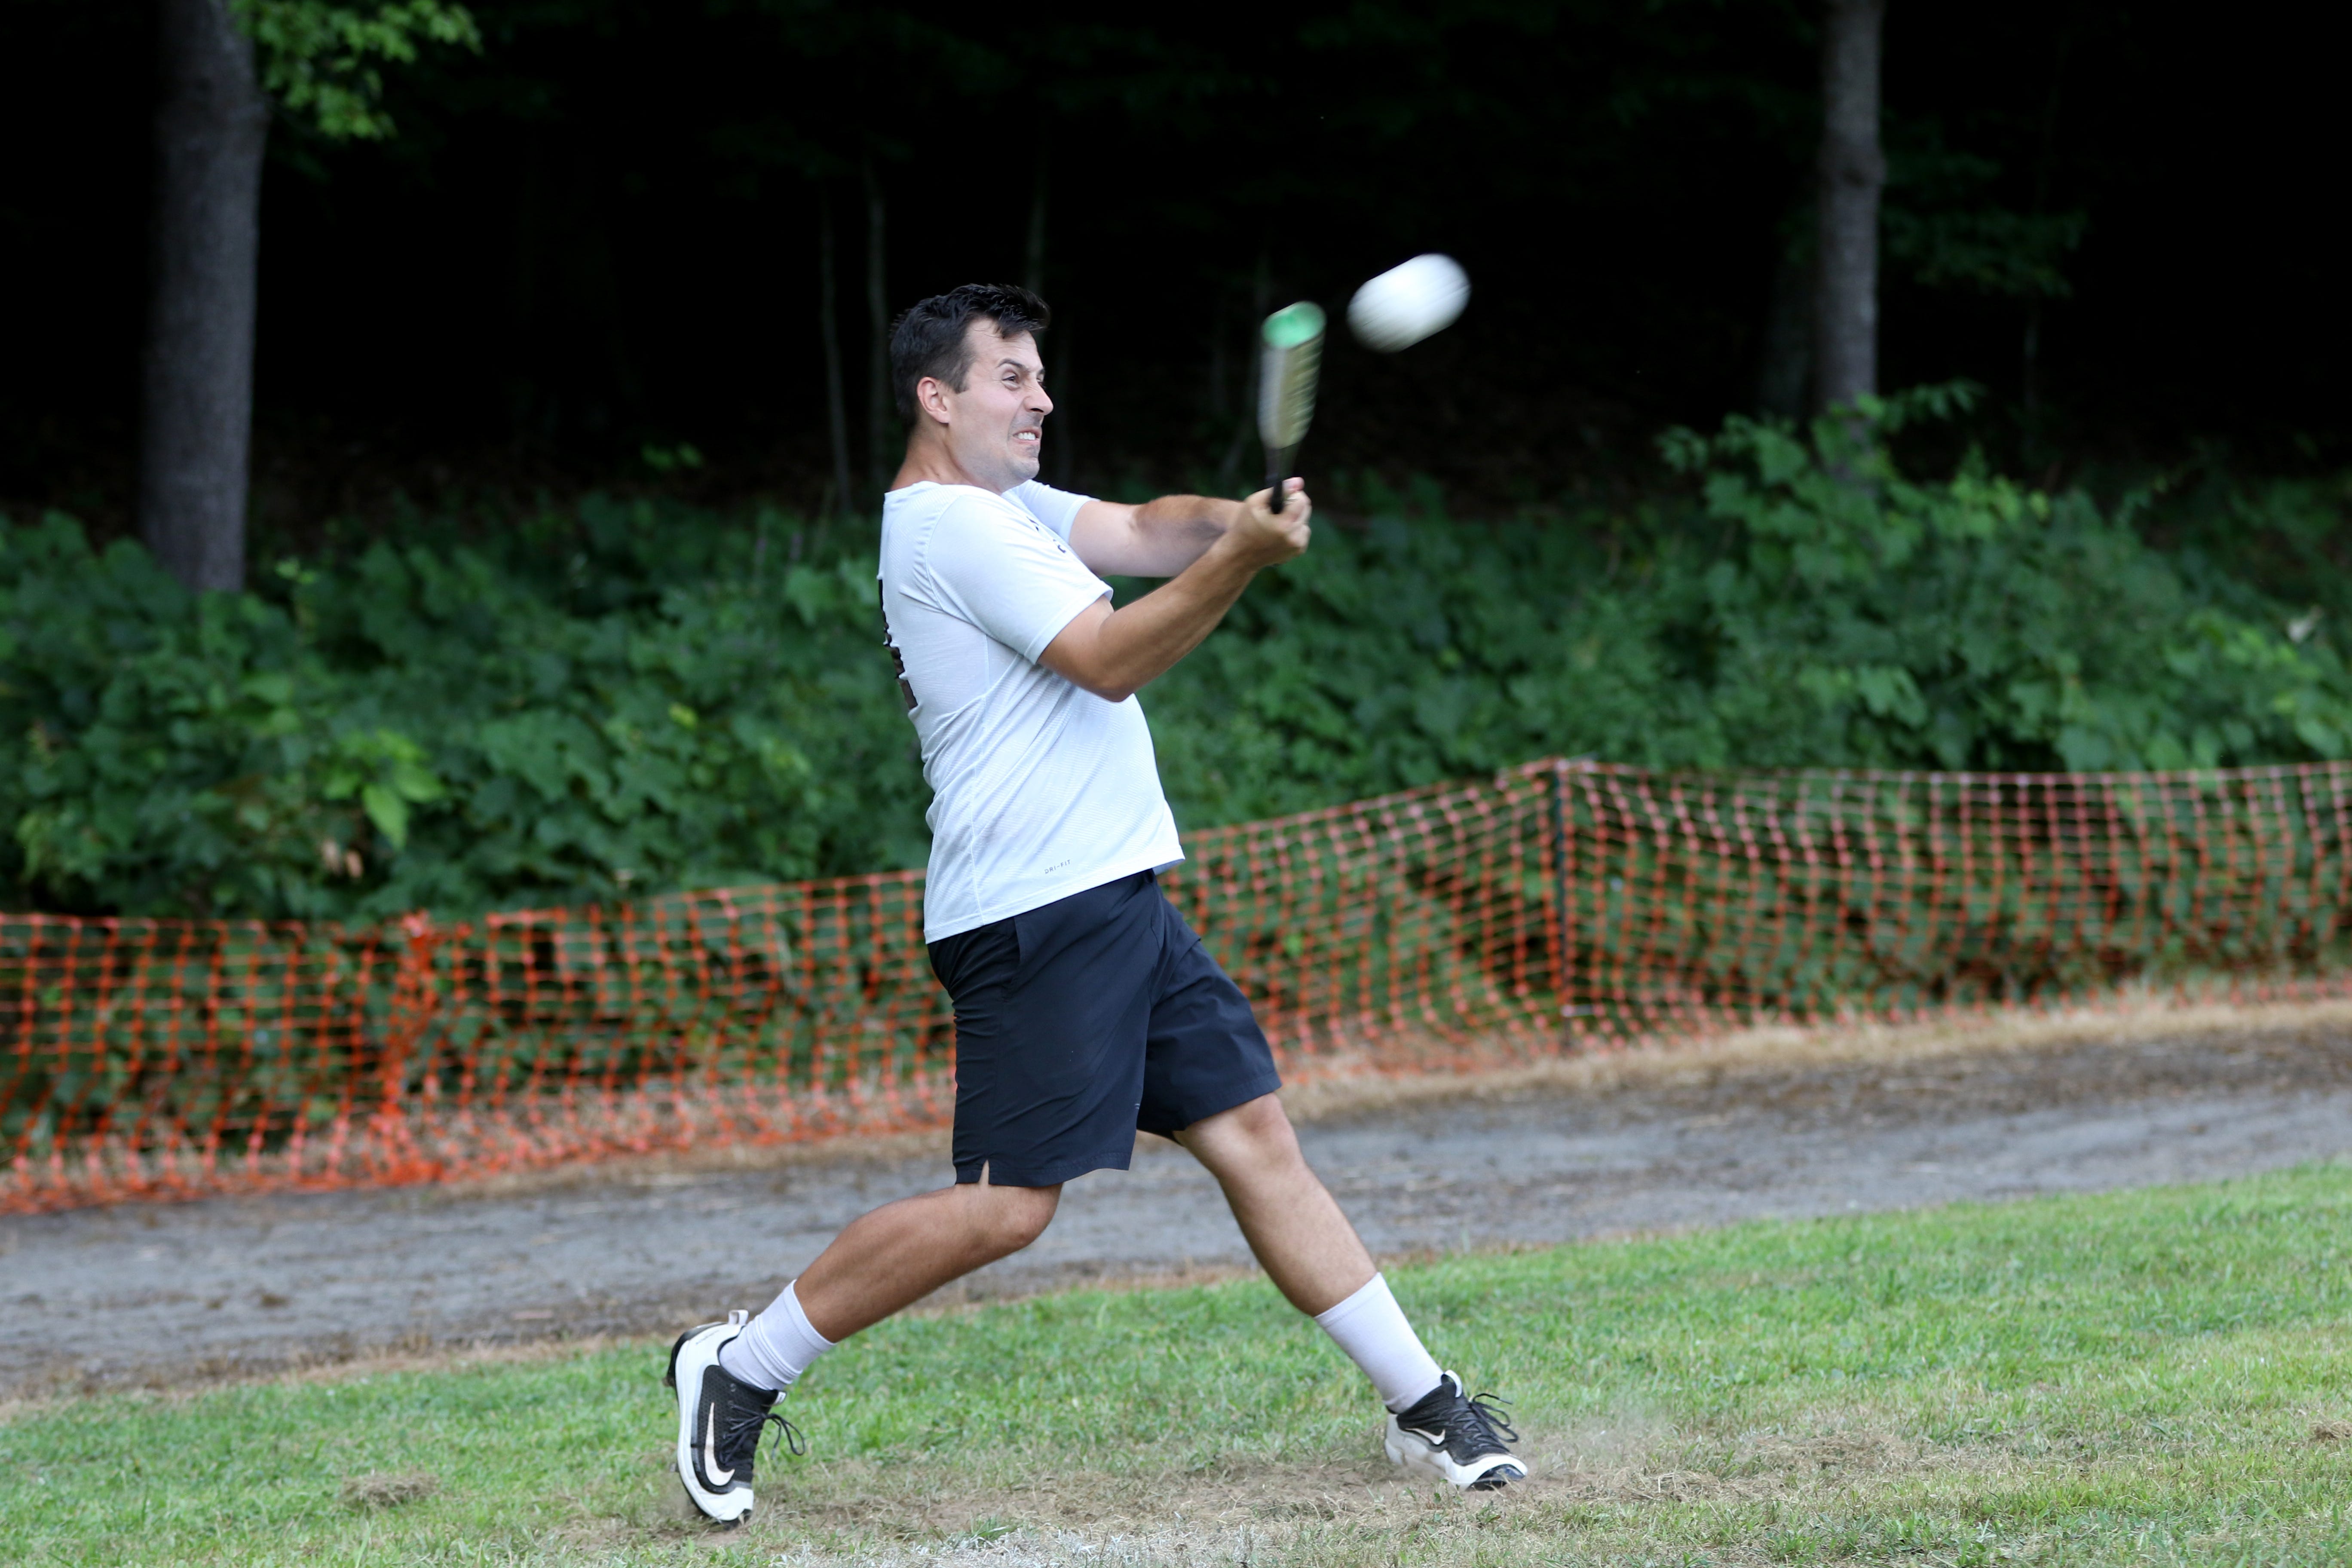 Peter Drobenko, of Haworth, New Jersey, connects during the softball tournament at the Ukrainian American Youth Association Resort Center on Saturday, Aug. 20, 2022.